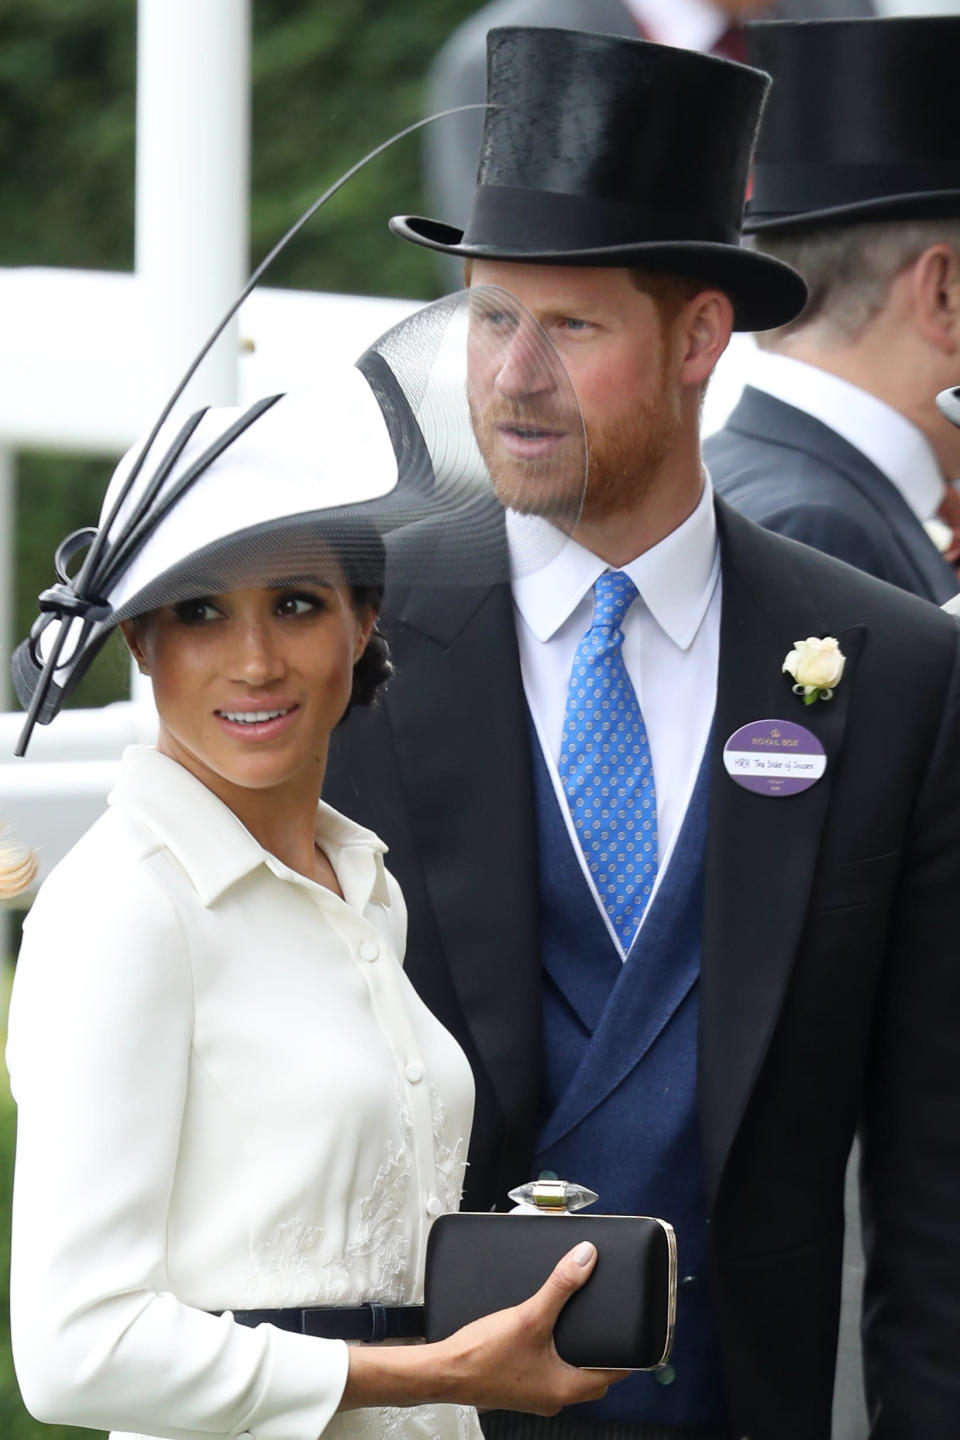 The Duchess of Sussex accessorised her racecourse aesthetic with the same Givenchy belt she donned on her debut engagement with the Queen in Cheshire [Photo: Getty]